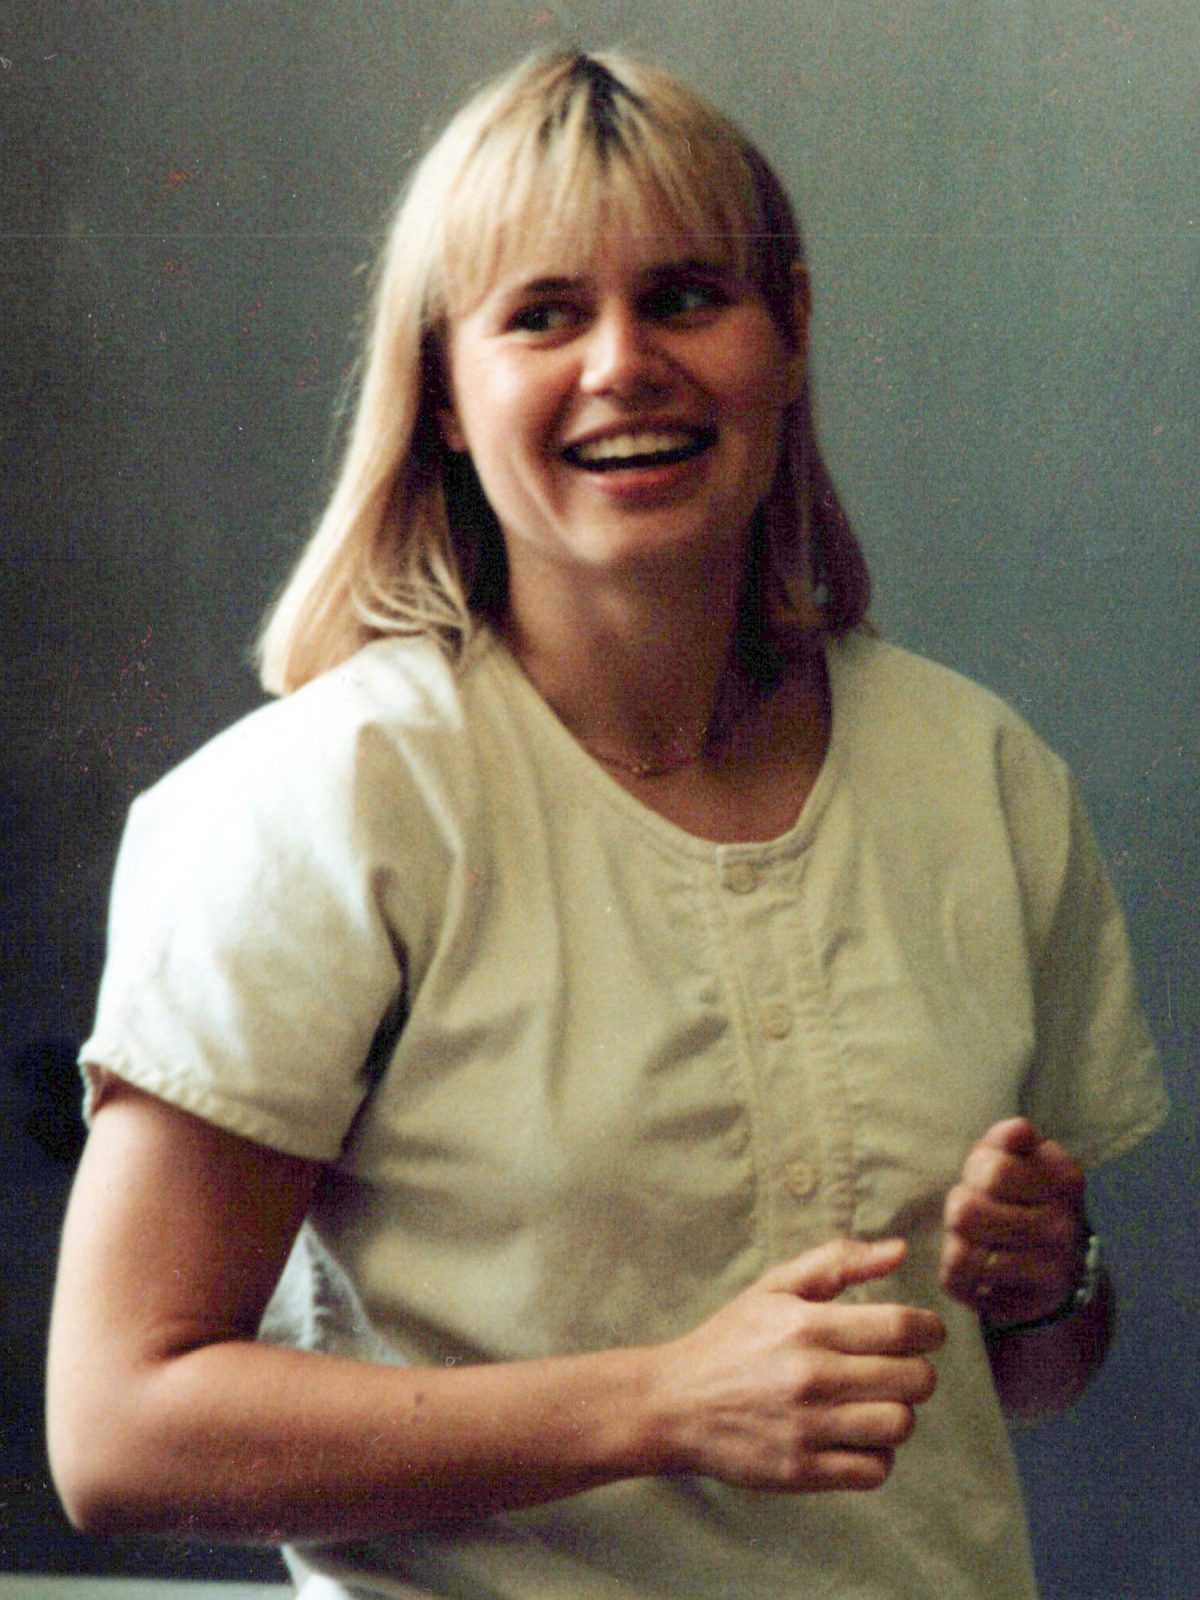 Young blonde girl with big smile, wearing 1980s style blouse.